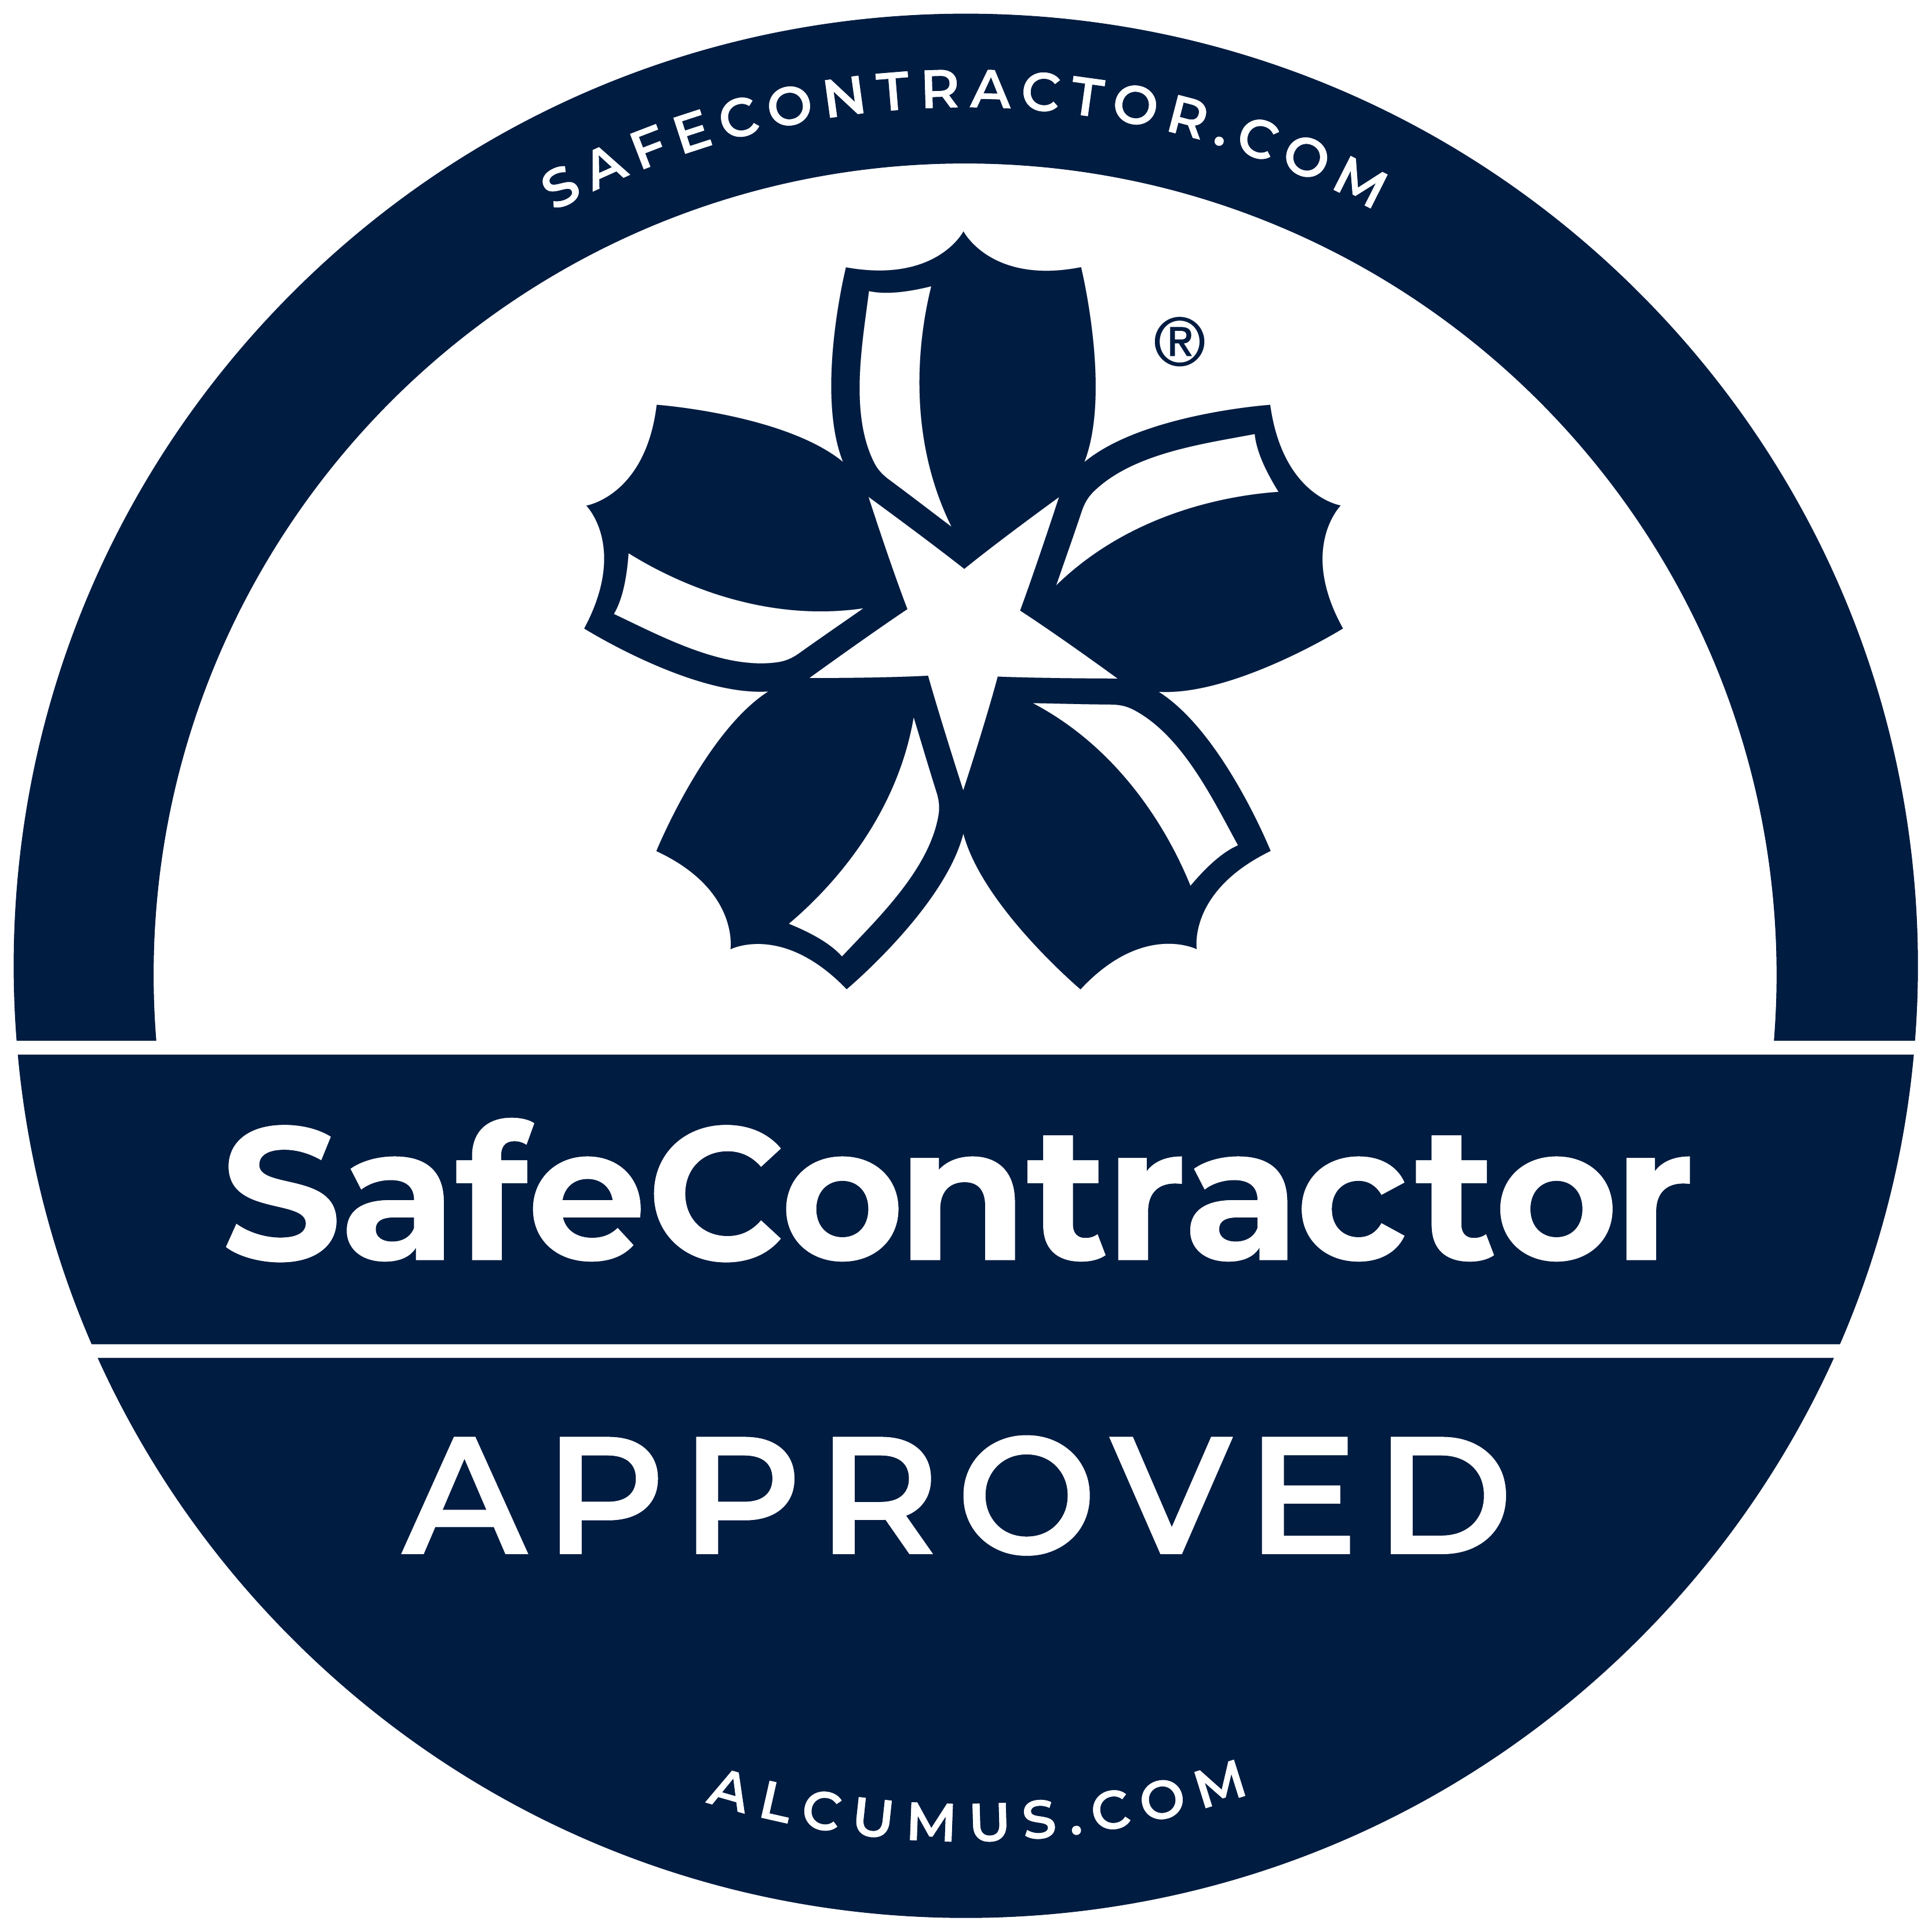 SafeContractor Approved Certification